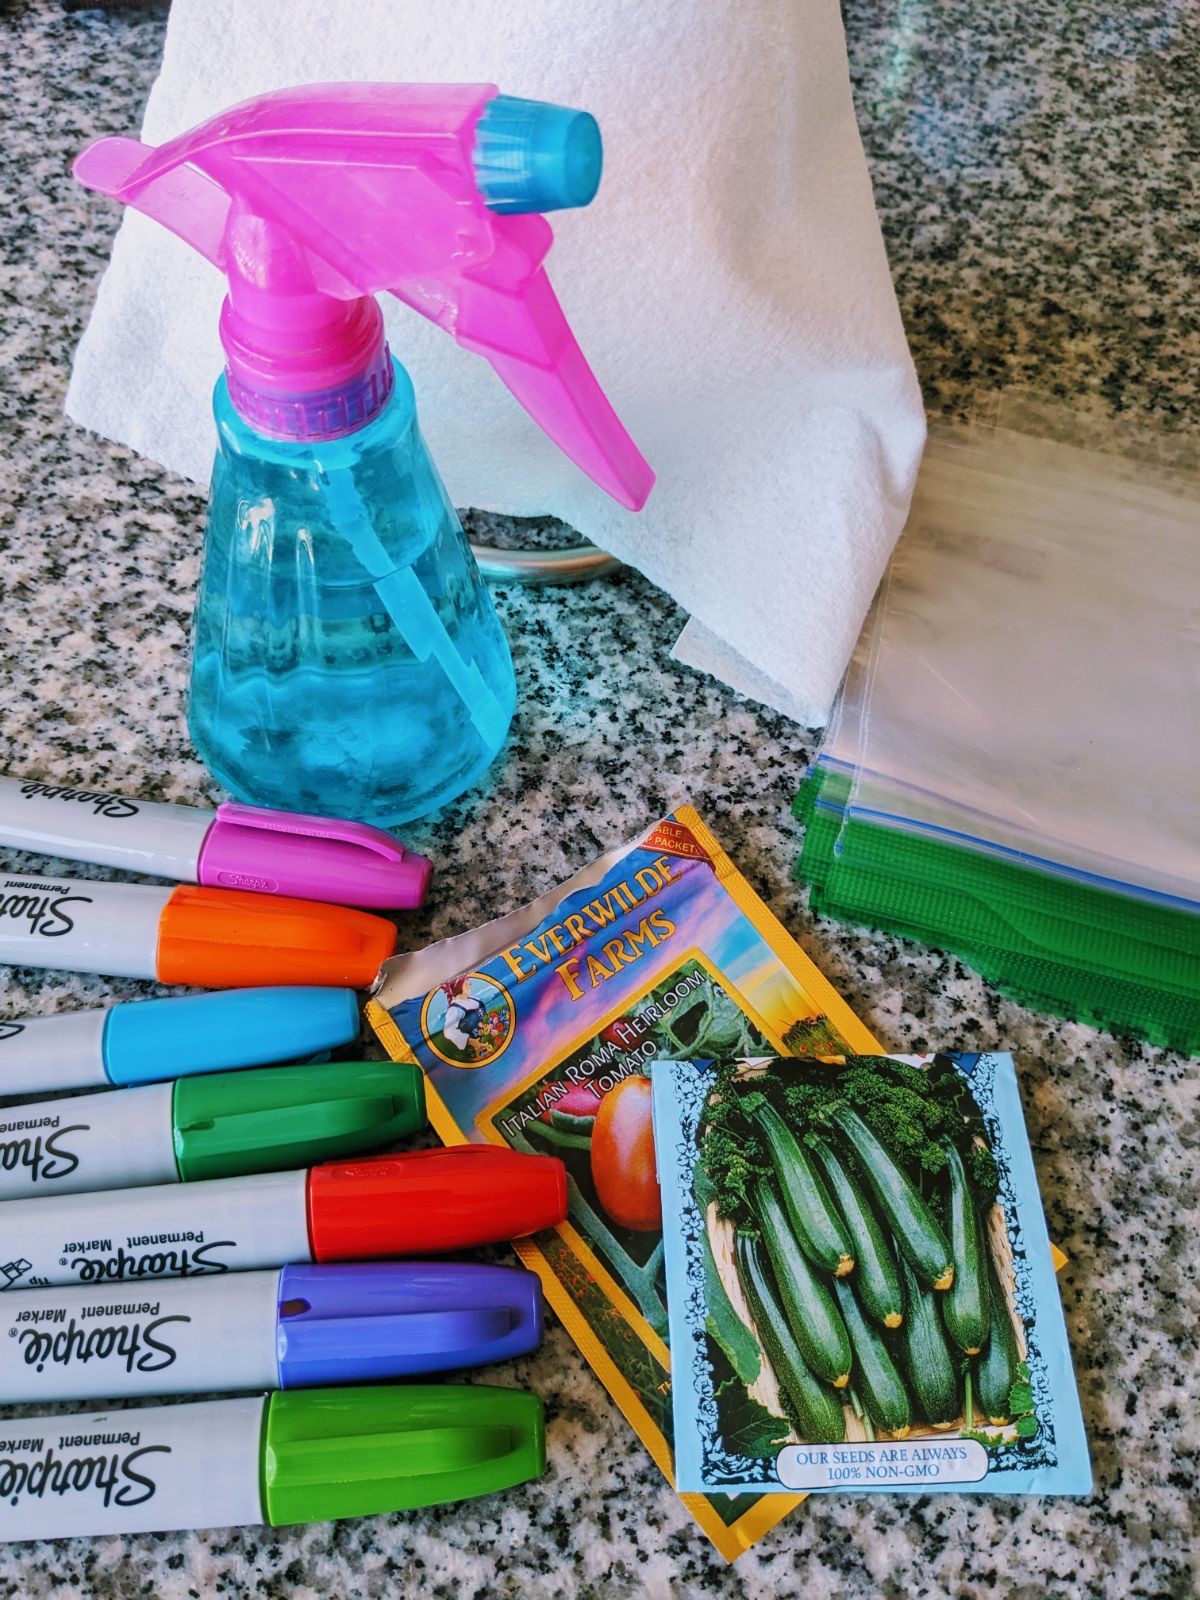 Spray bottle, baggies, paper towel, seeds, and markers